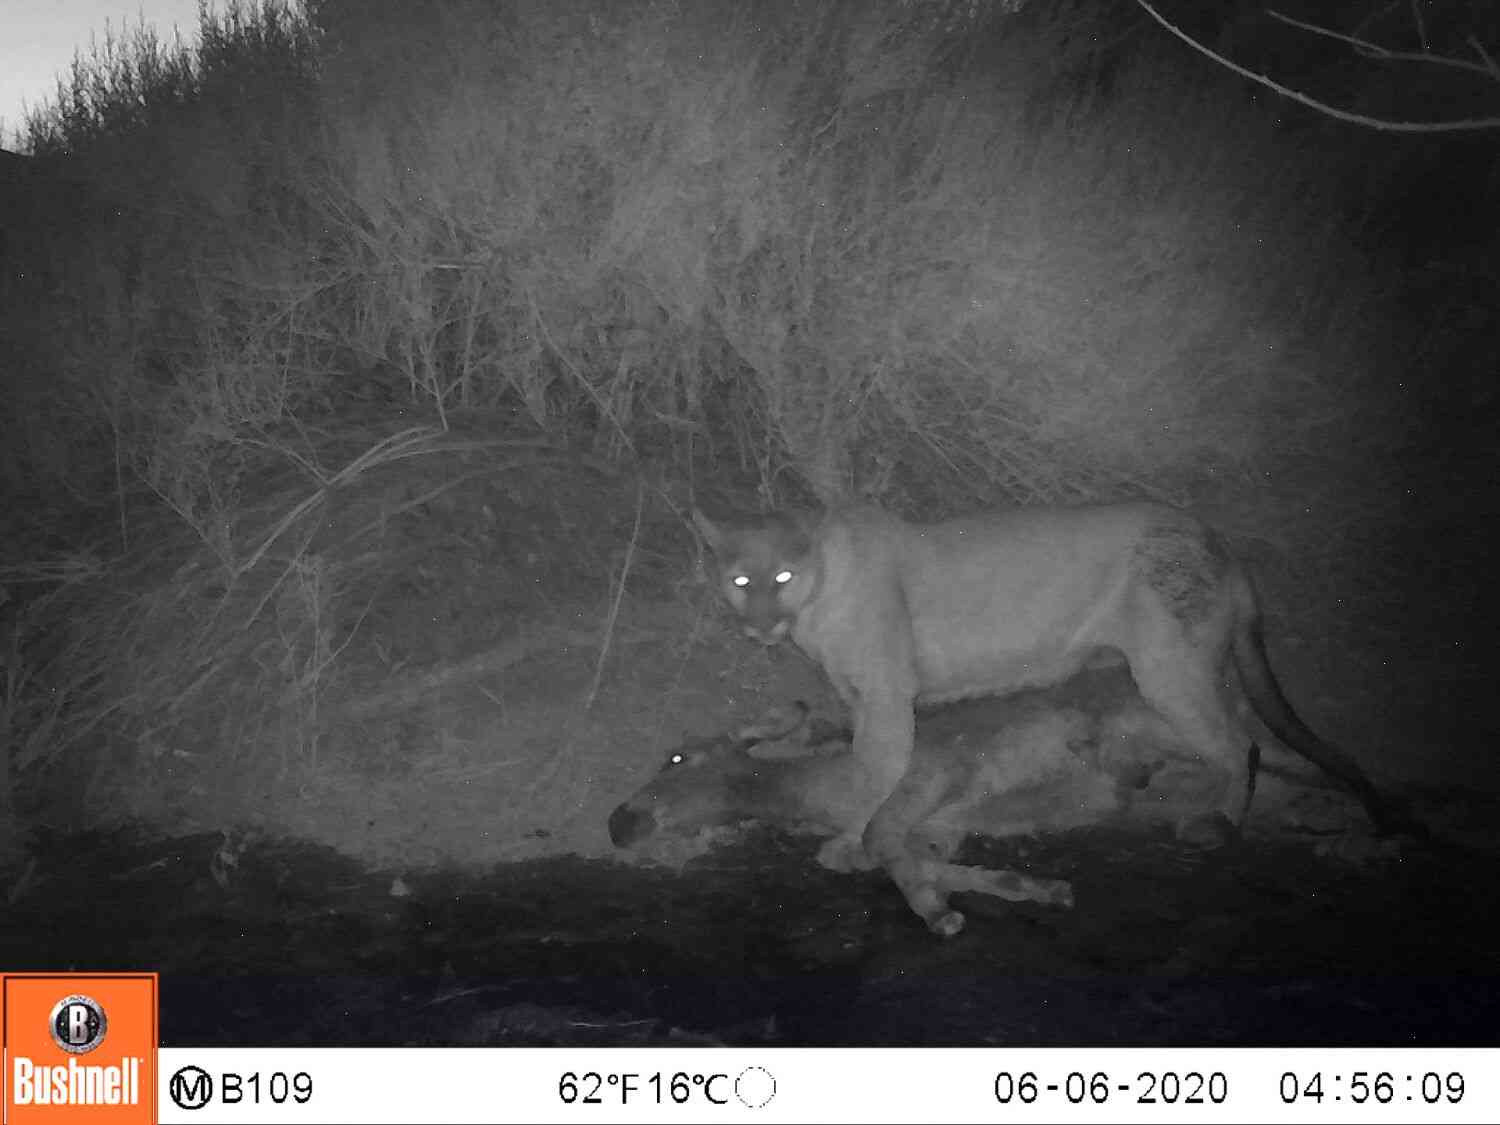 Mountain Lions are a big problem in the Sierra Nevada